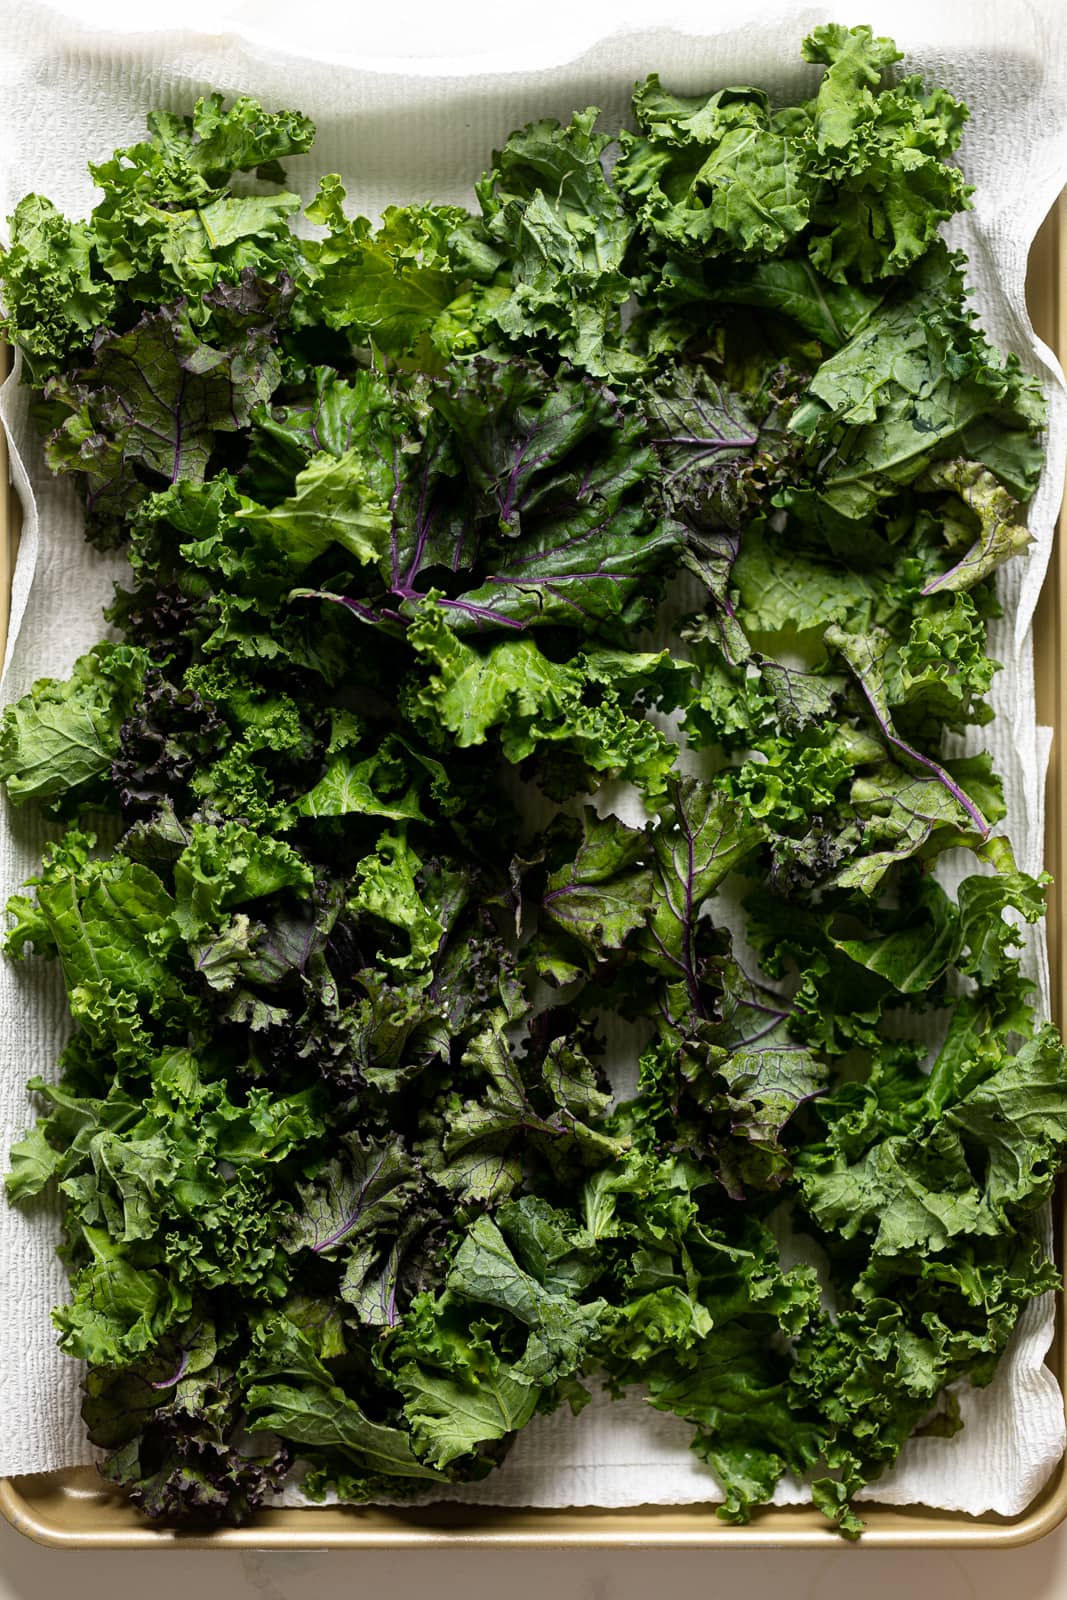 Kale on paper towels